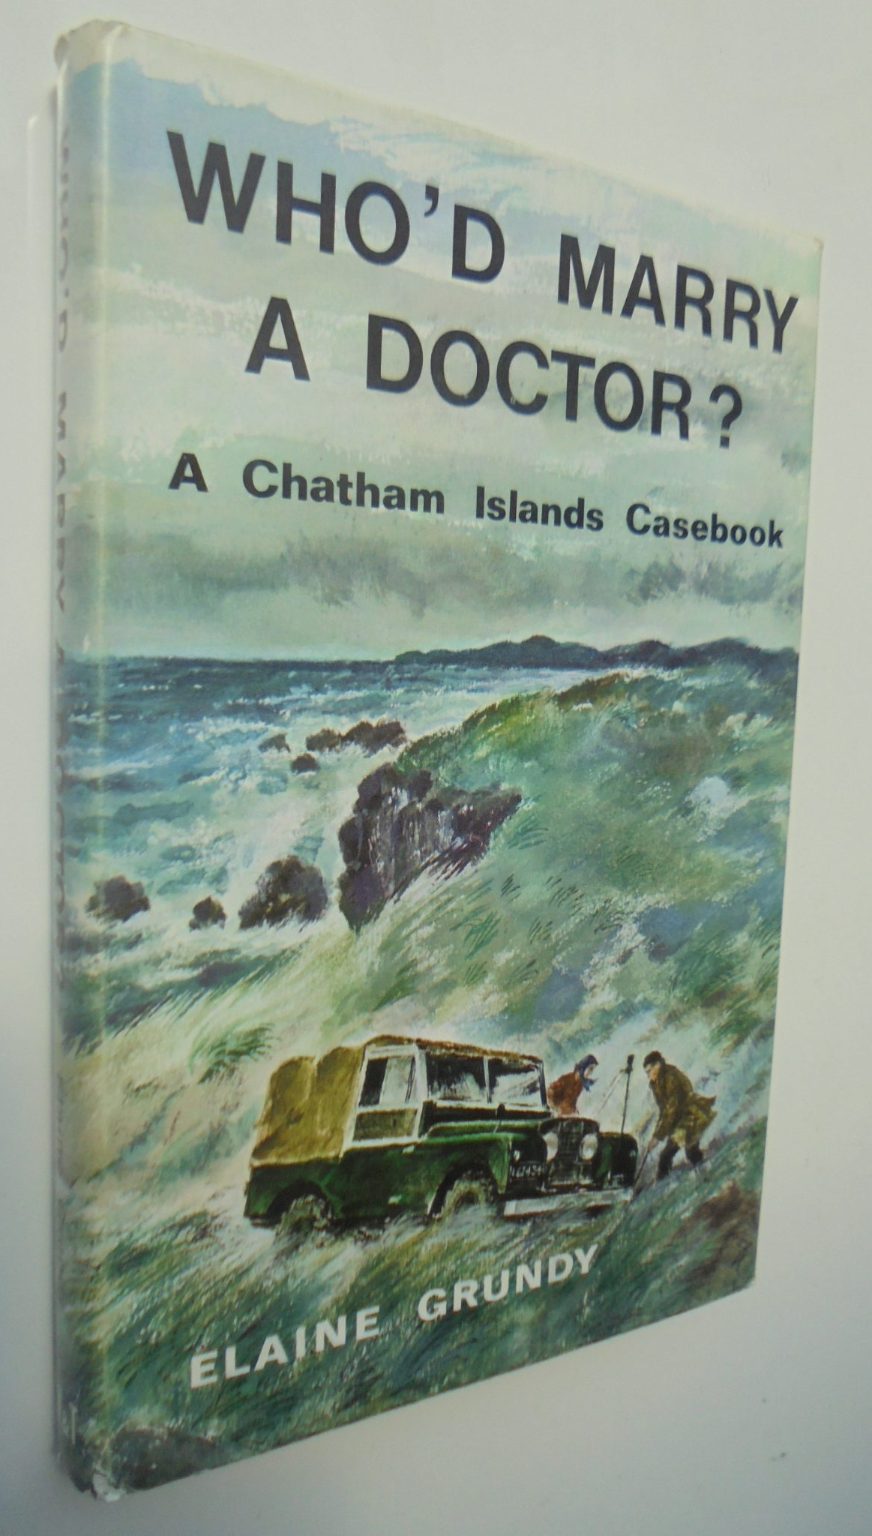 Who'd Marry a Doctor?: Chatham Islands Casebook. By Elaine Grundy.